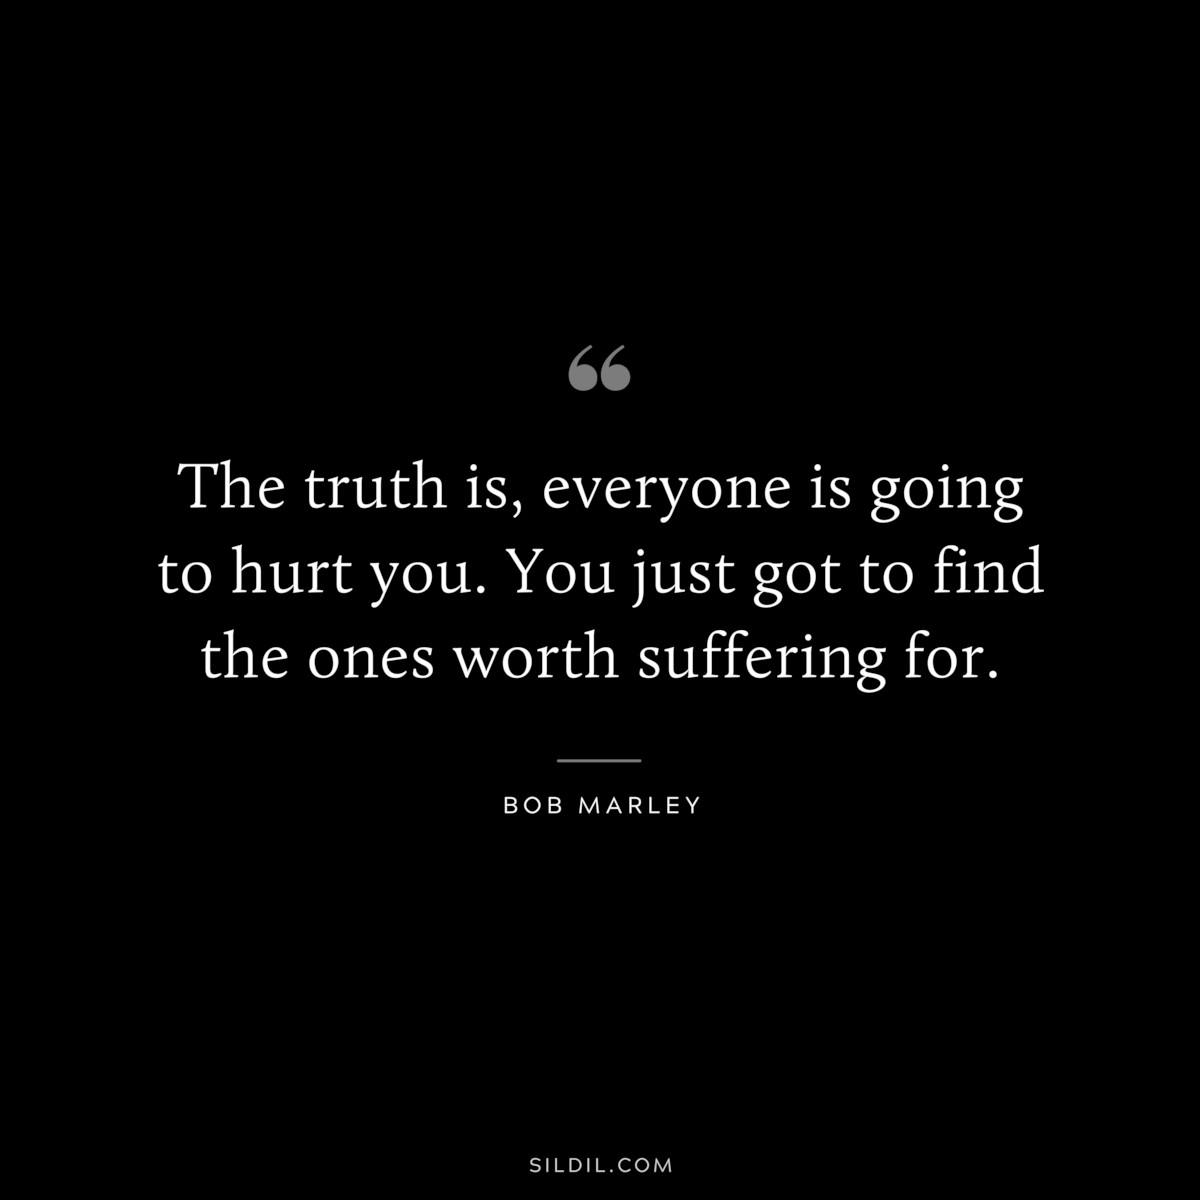 The truth is, everyone is going to hurt you. You just got to find the ones worth suffering for. ― Bob Marley